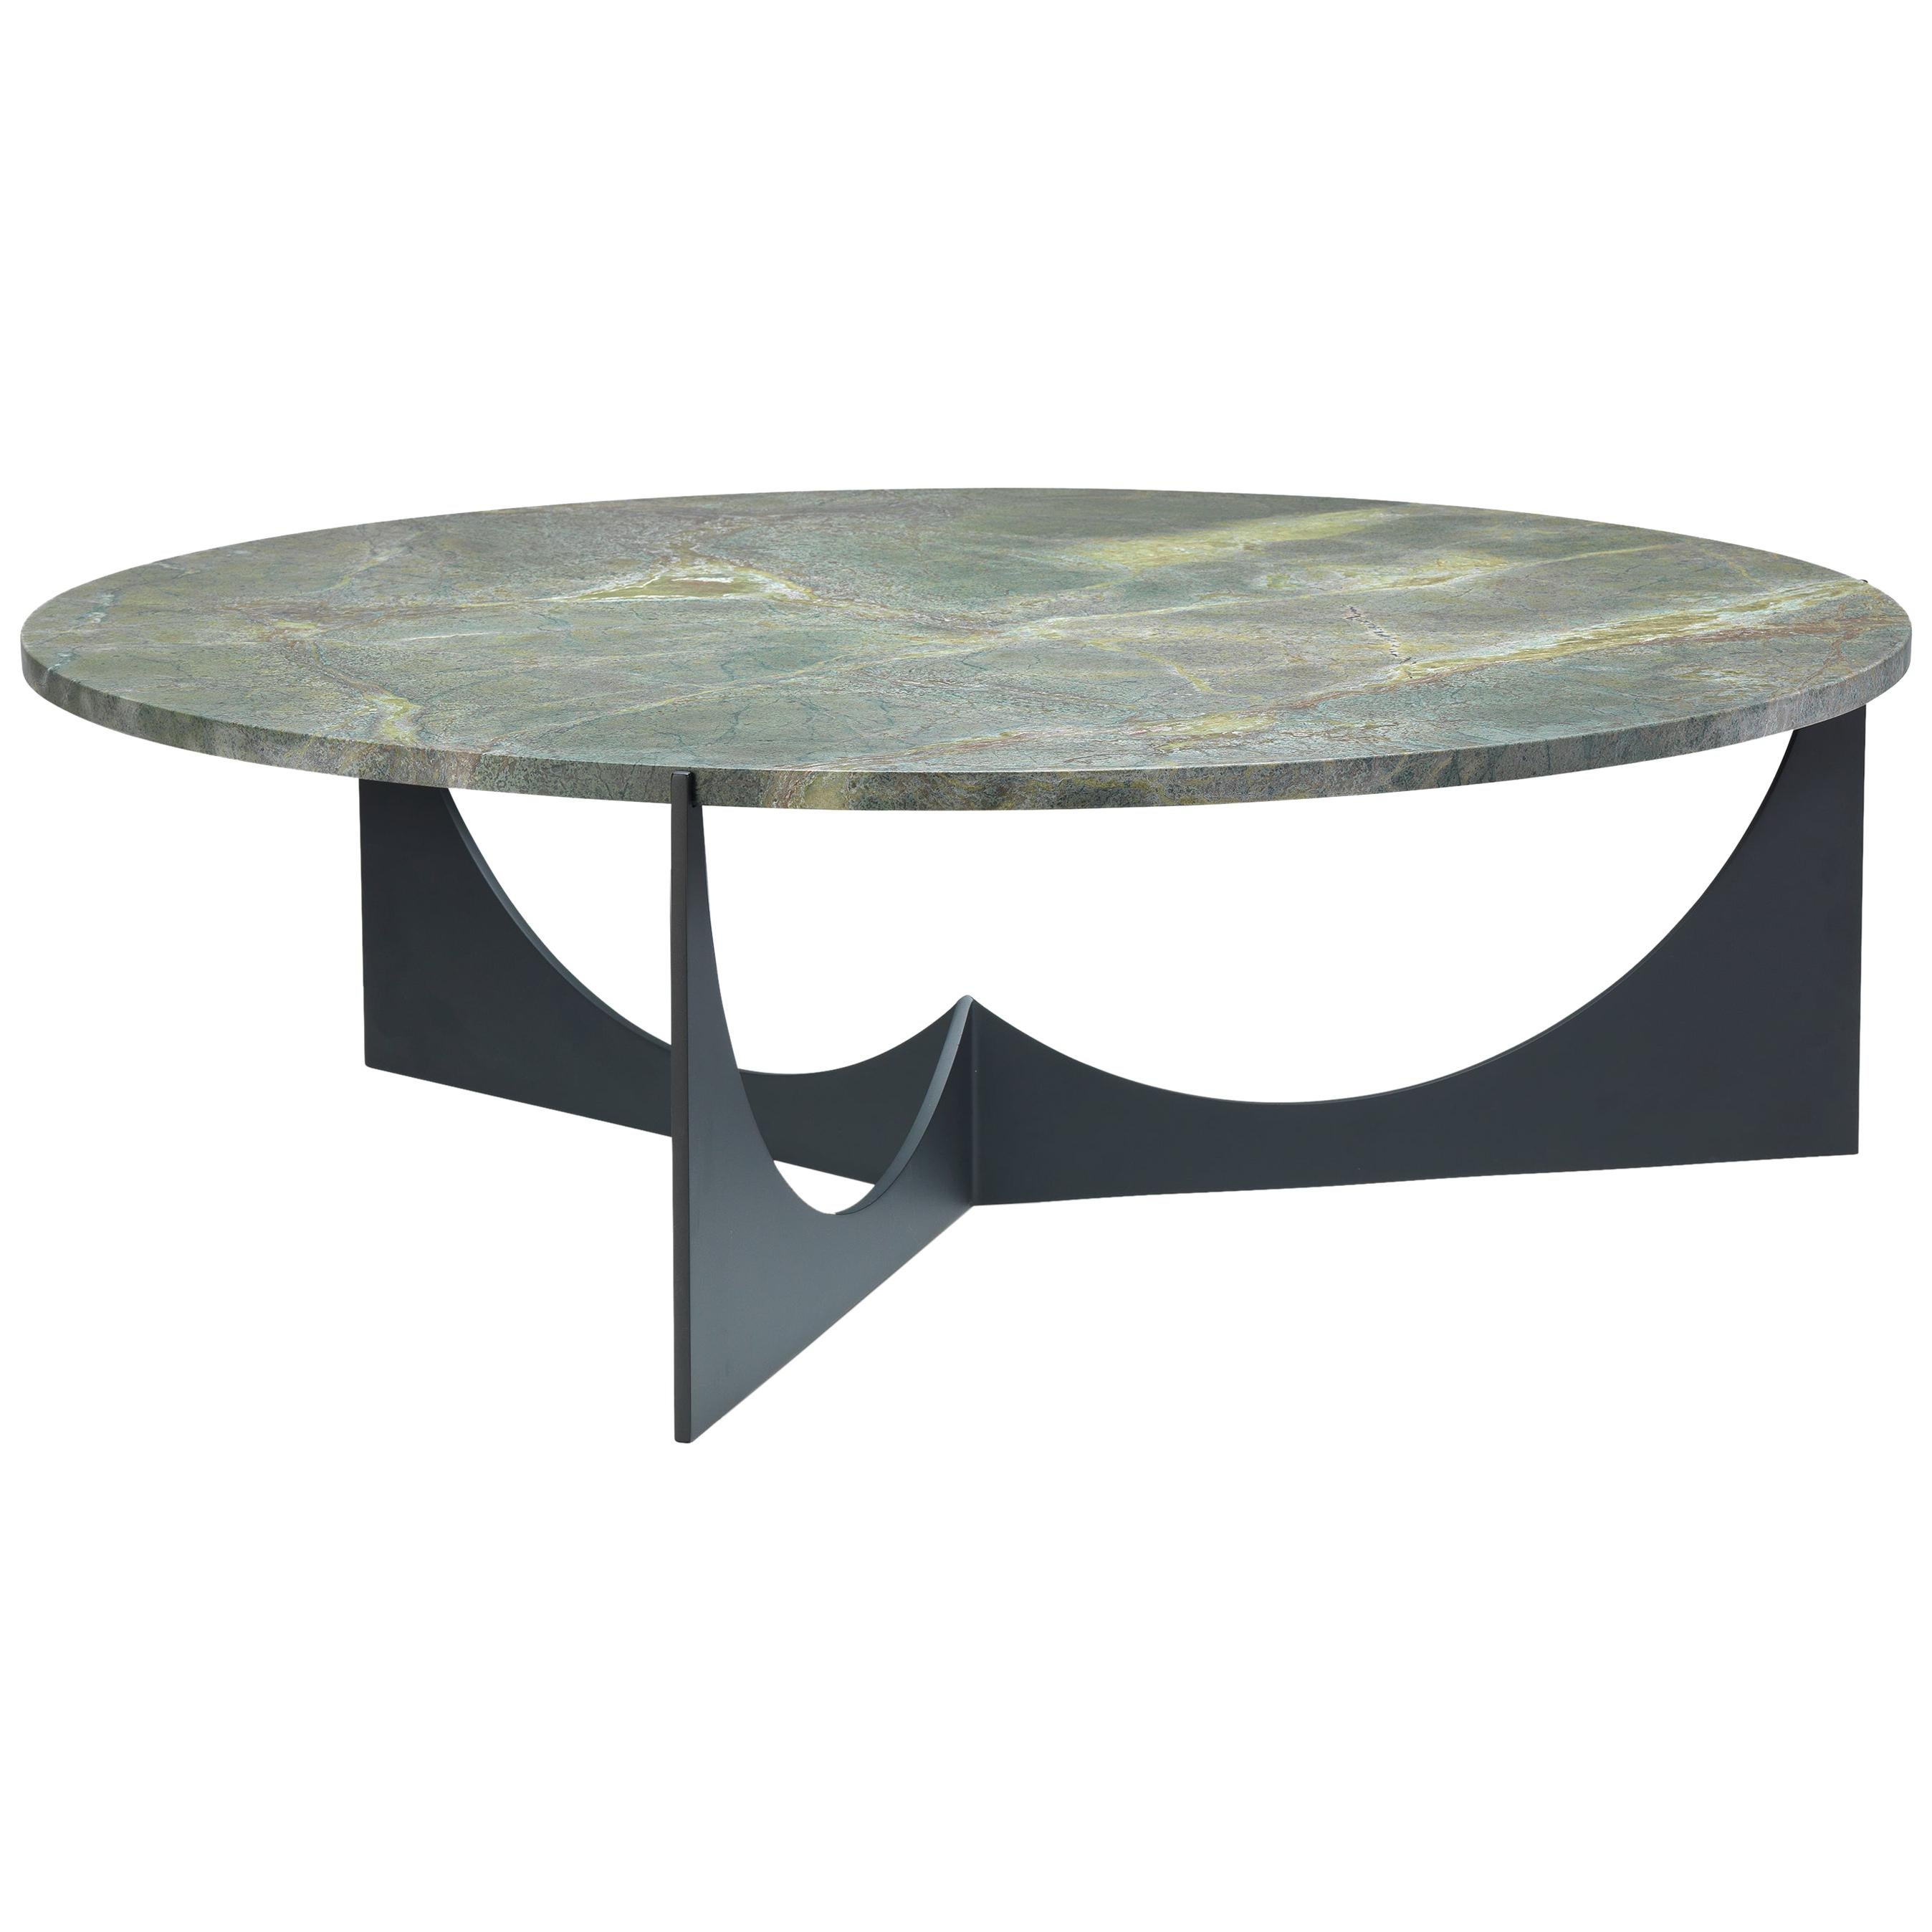 Eclipse Round Coffee Table Black Stainless Steel Base and Honed Granite Top